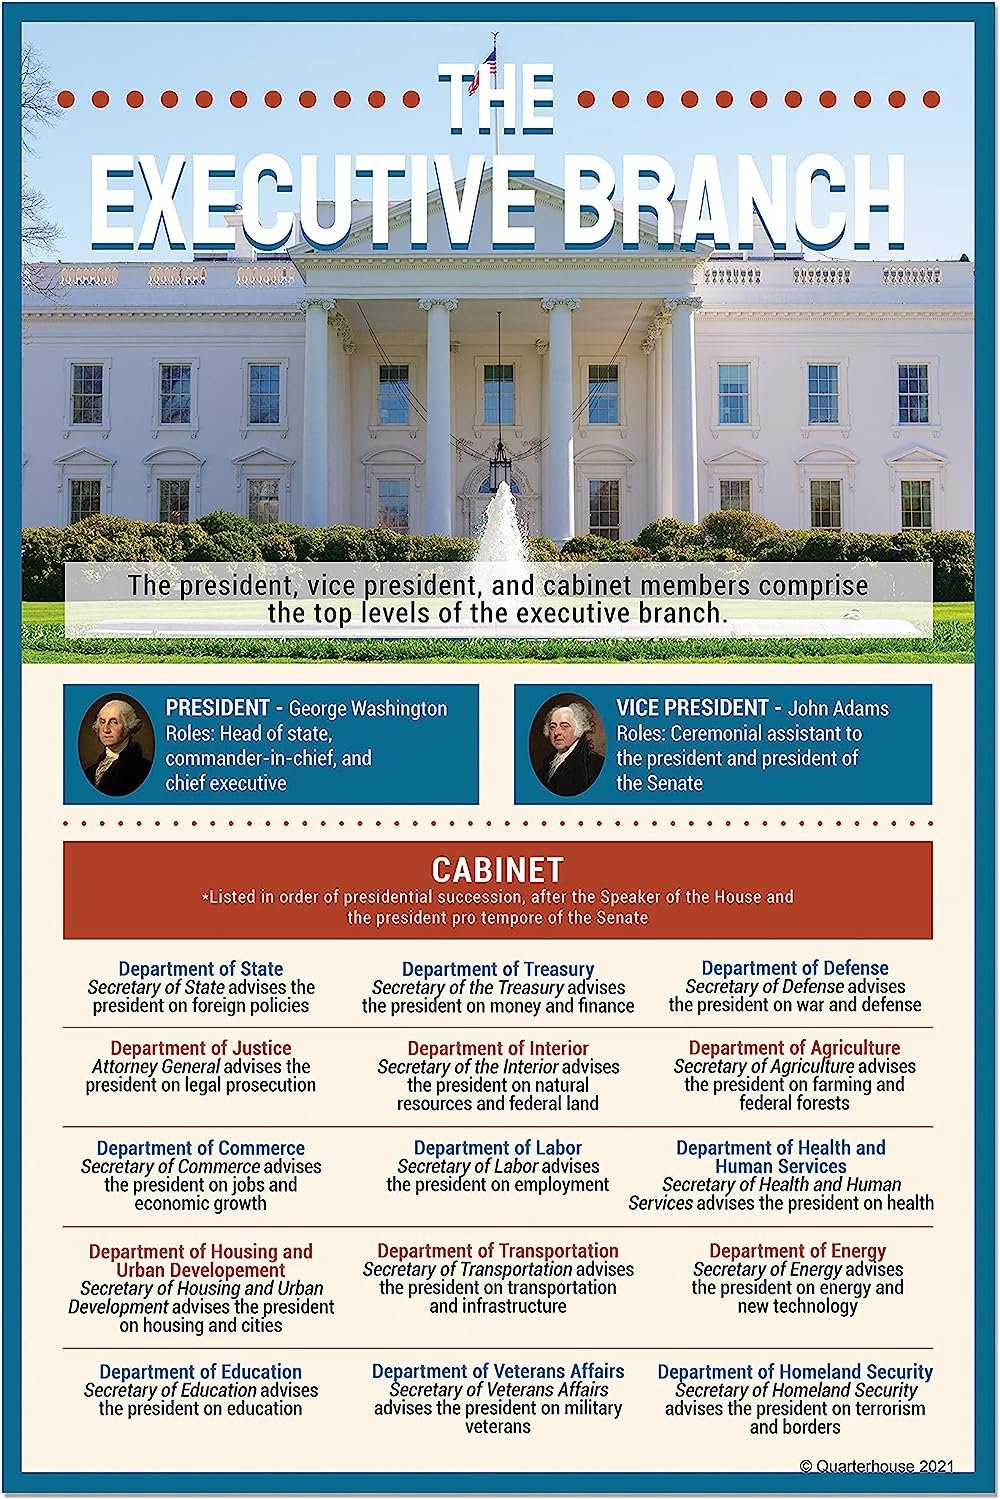 Quarterhouse Three Branches of US Government: Checks and Balances Poster Set, Social Studies Classroom Learning Materials for K-12 Students and Teachers, Set of 4, 12 x 18 Inches, Extra Durable